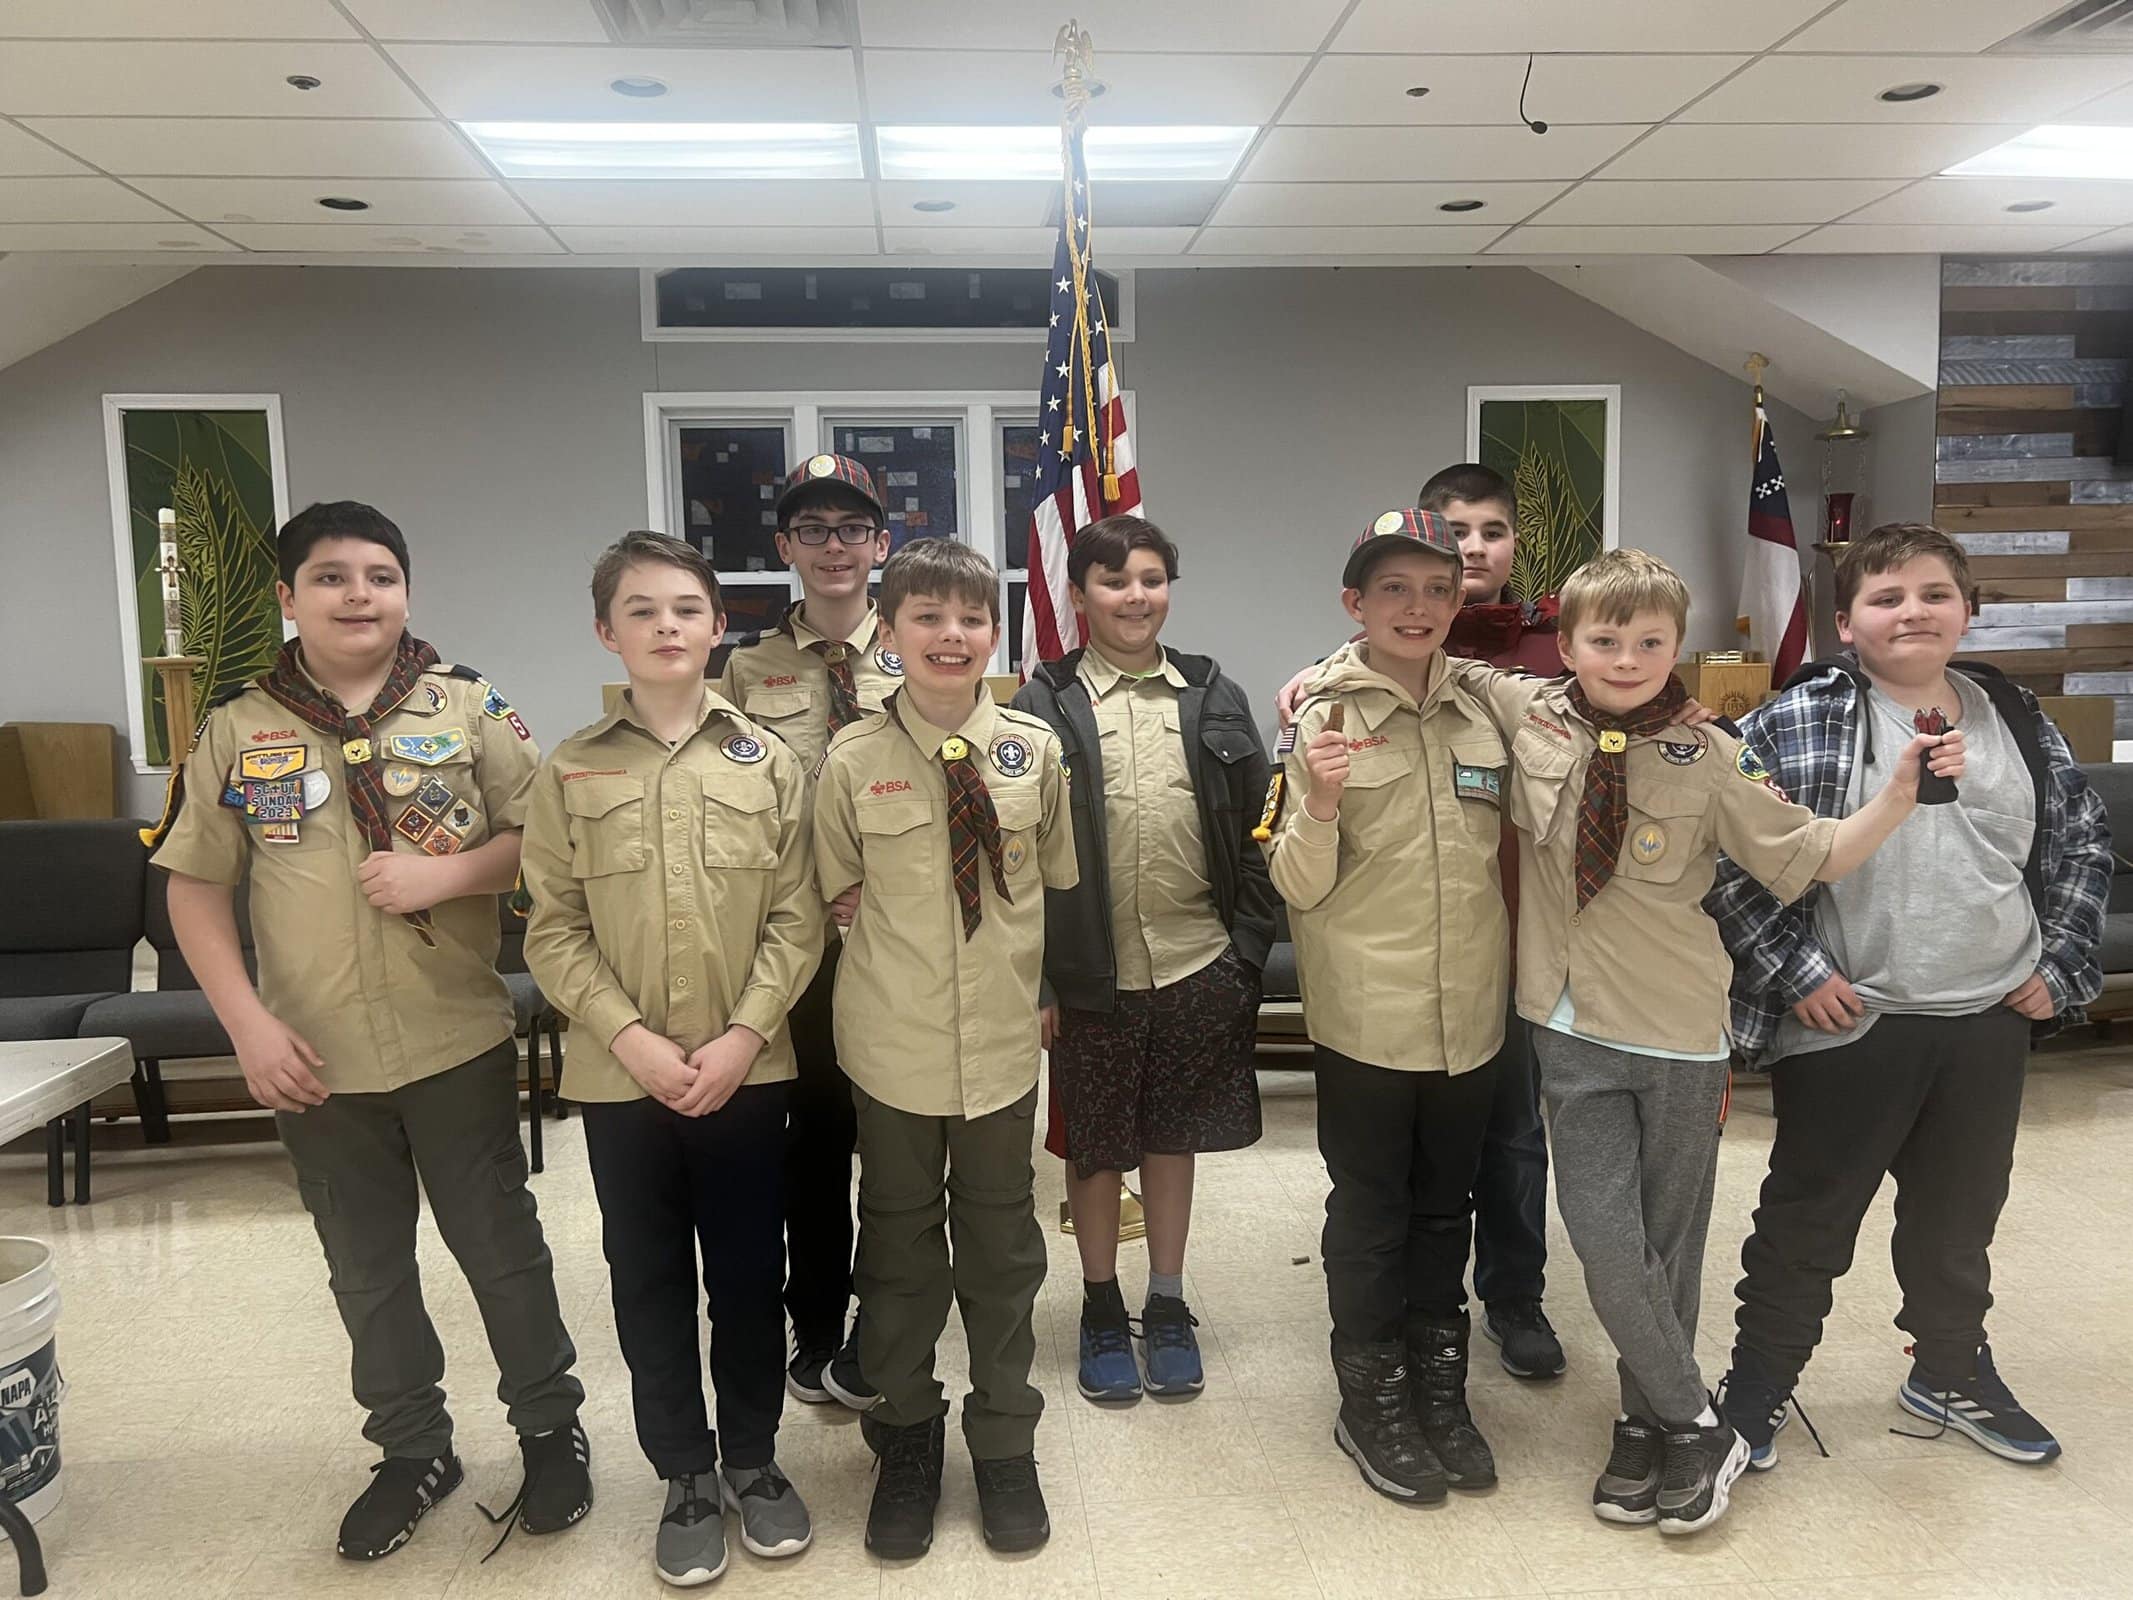 Northborough Cub Scouts earn Arrow of Light